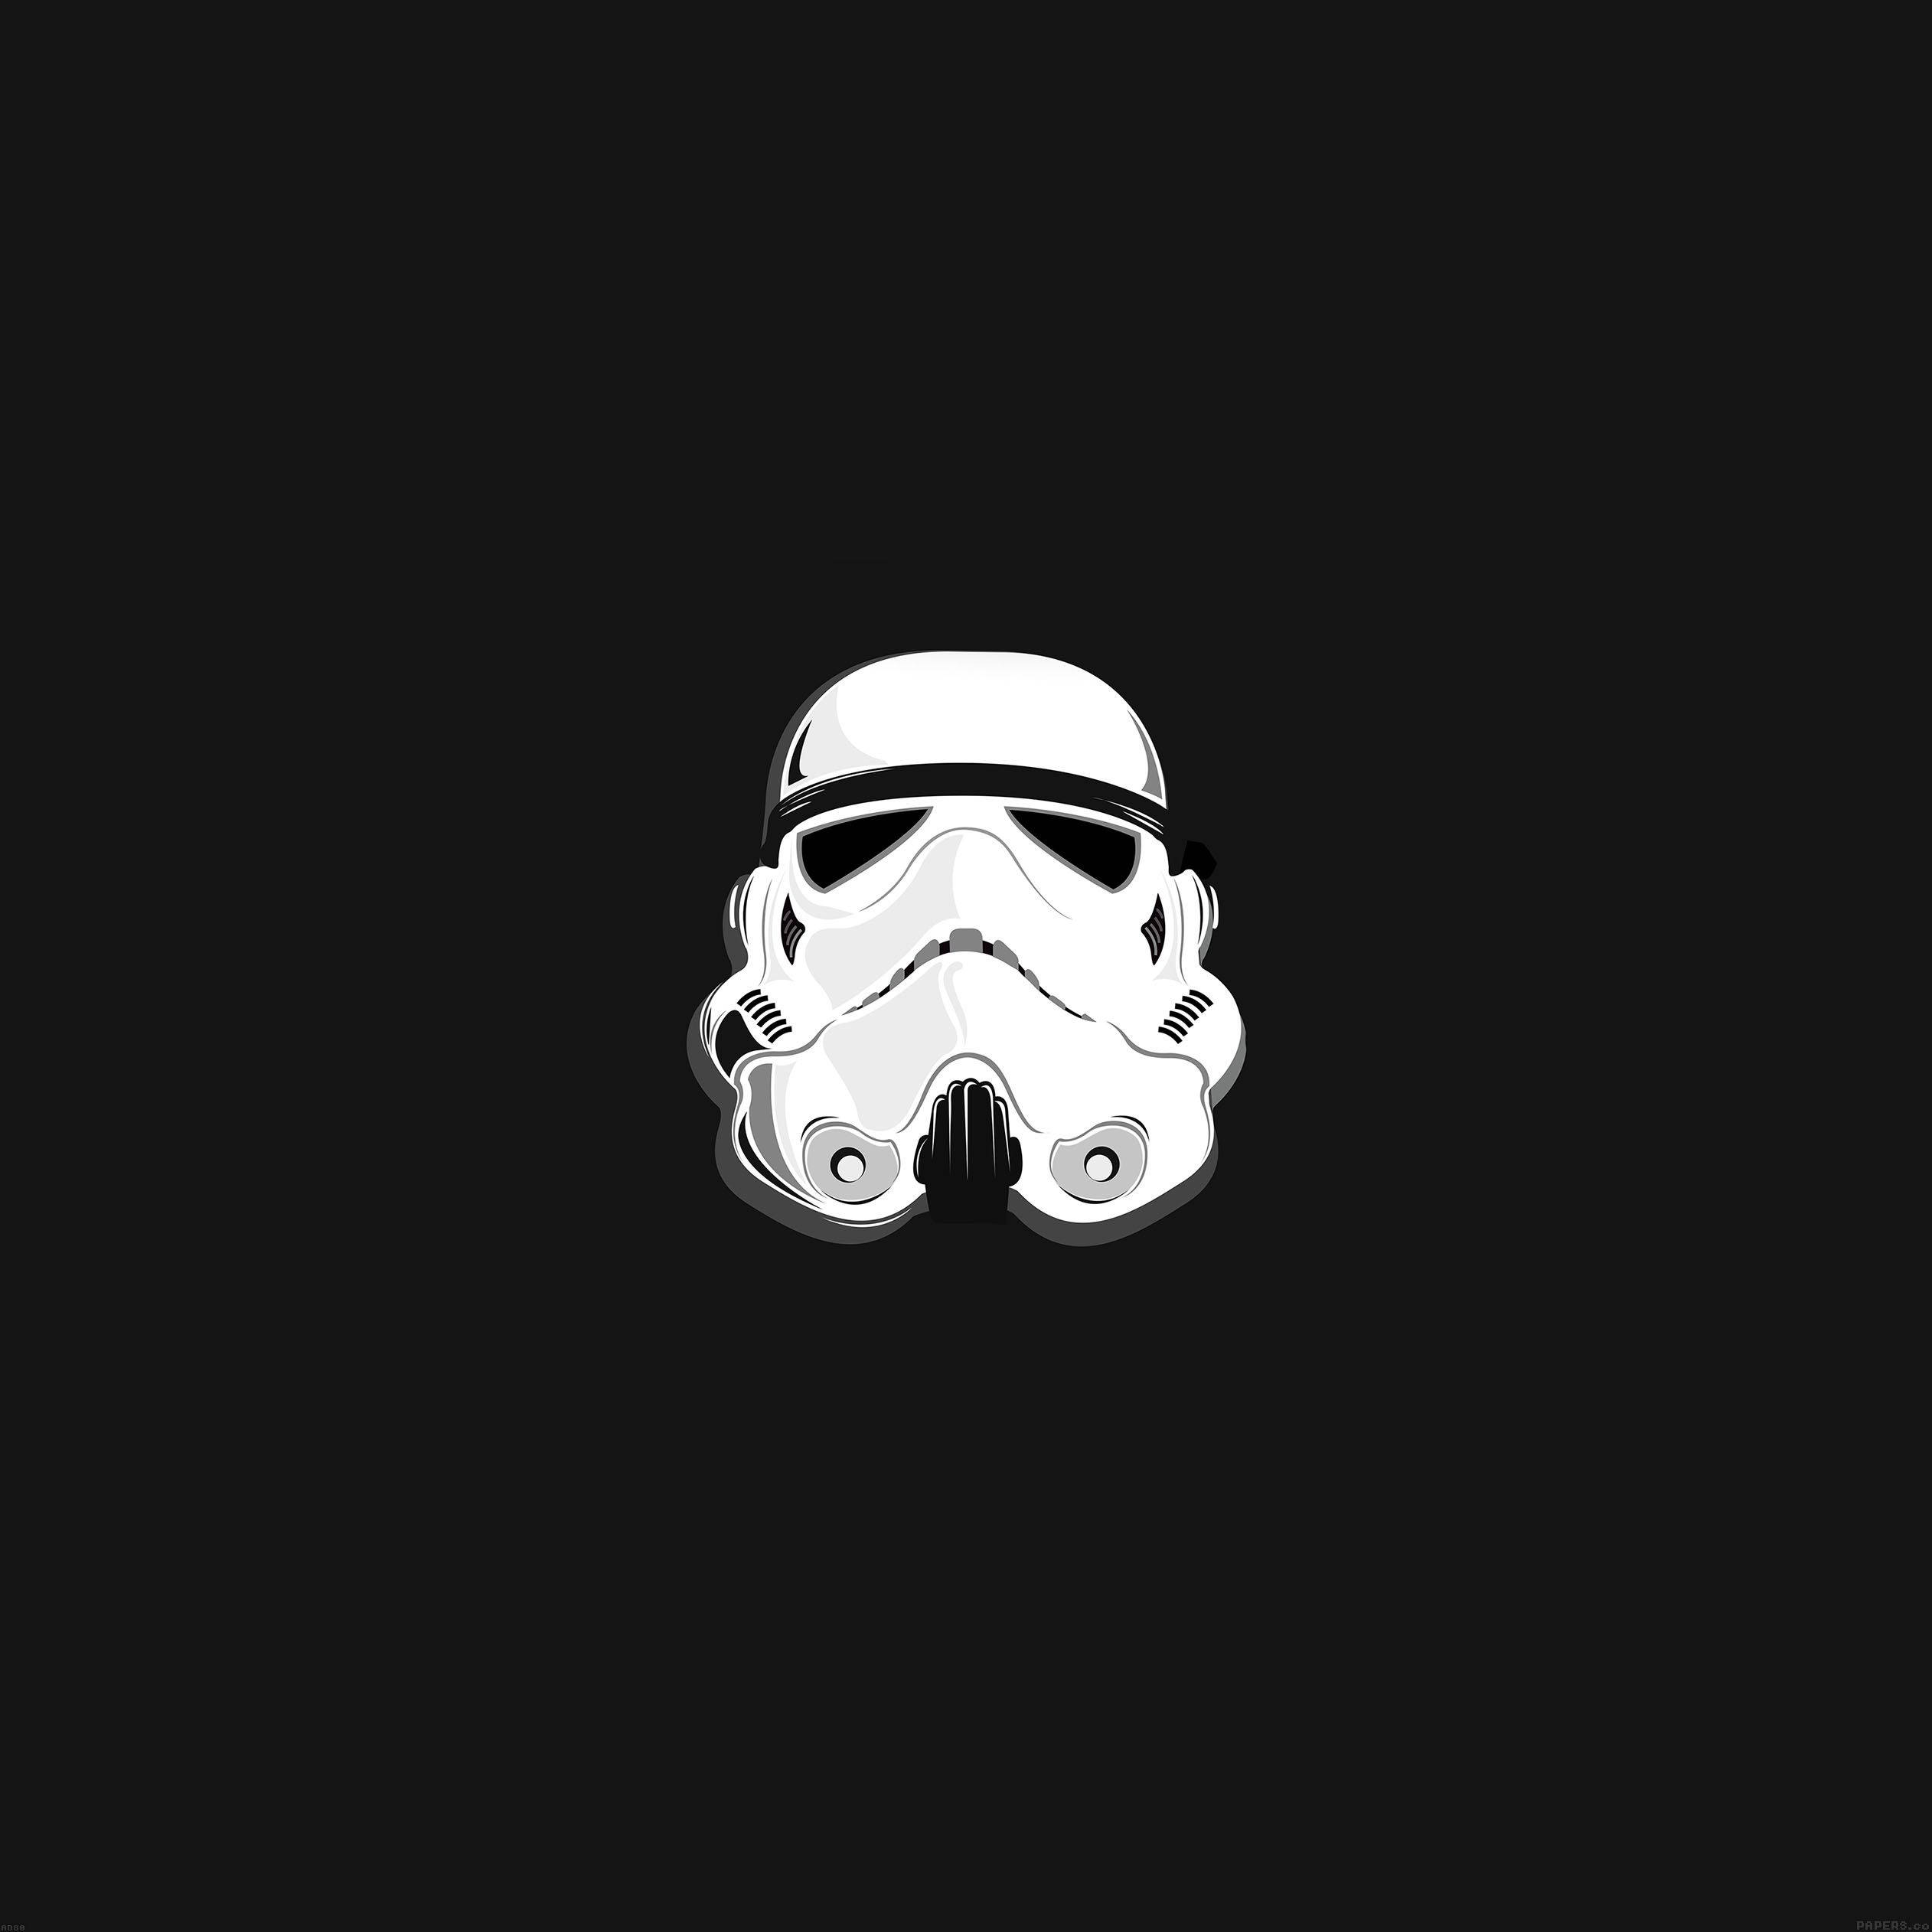 Awesome Stormtrooper Star Wars Tablet Wallpaper